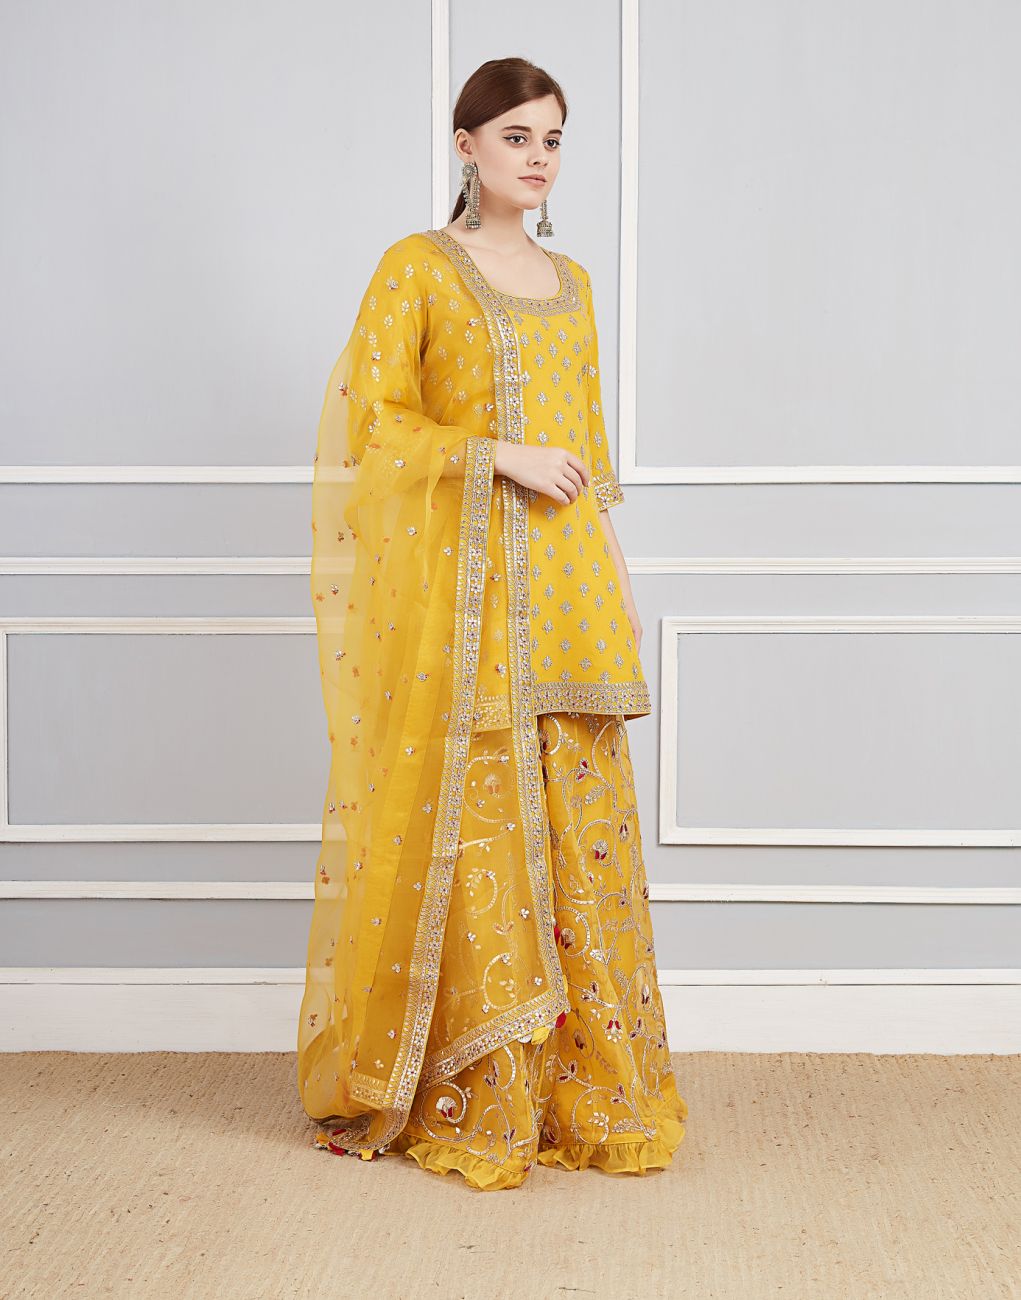 Yellow Organza Sharara Set Indian Clothing in Denver, CO, Aurora, CO, Boulder, CO, Fort Collins, CO, Colorado Springs, CO, Parker, CO, Highlands Ranch, CO, Cherry Creek, CO, Centennial, CO, and Longmont, CO. NATIONWIDE SHIPPING USA- India Fashion X